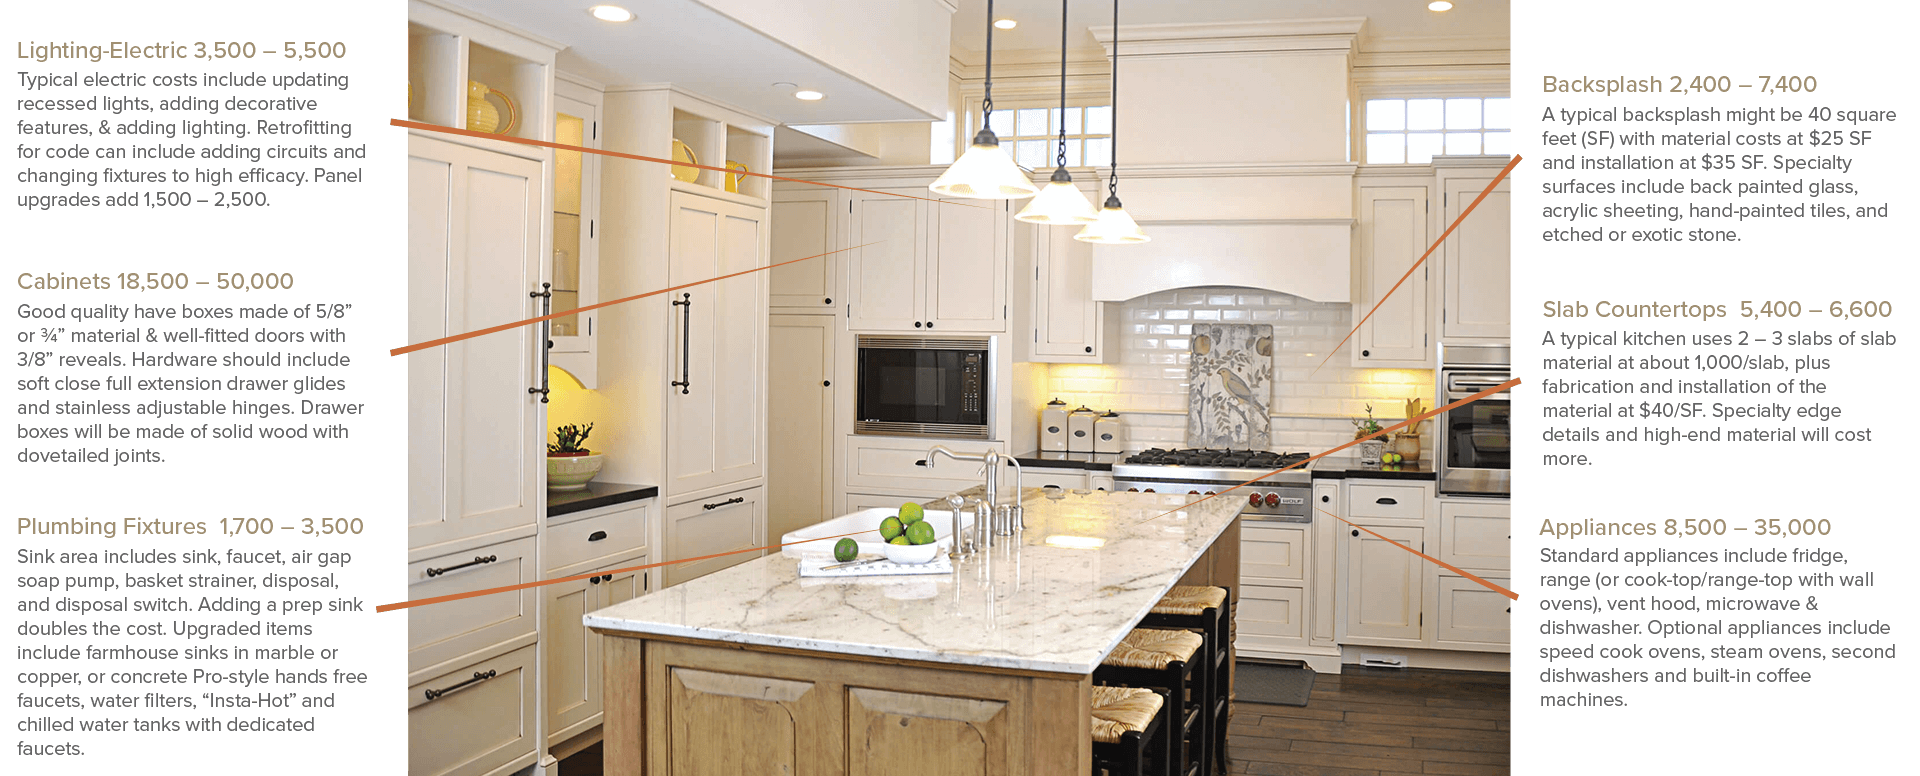 5 Kitchen Counter Extensions Ideas for Added Functionality